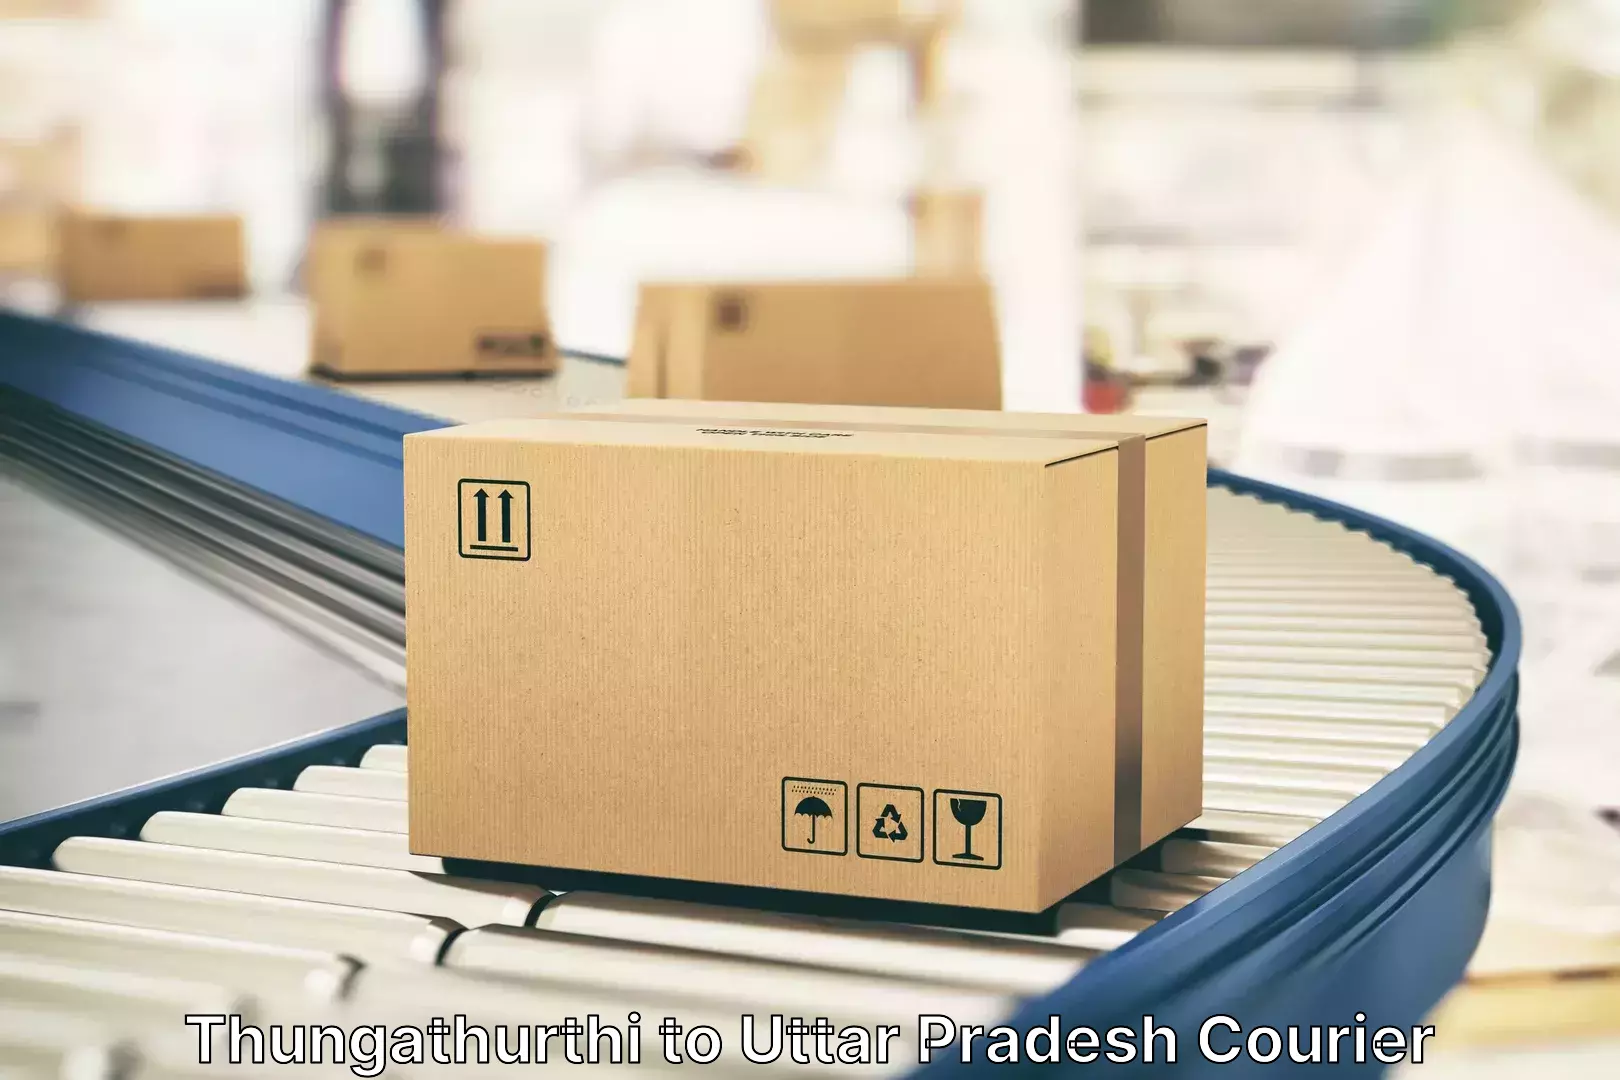 Personal effects shipping in Thungathurthi to Poonchh